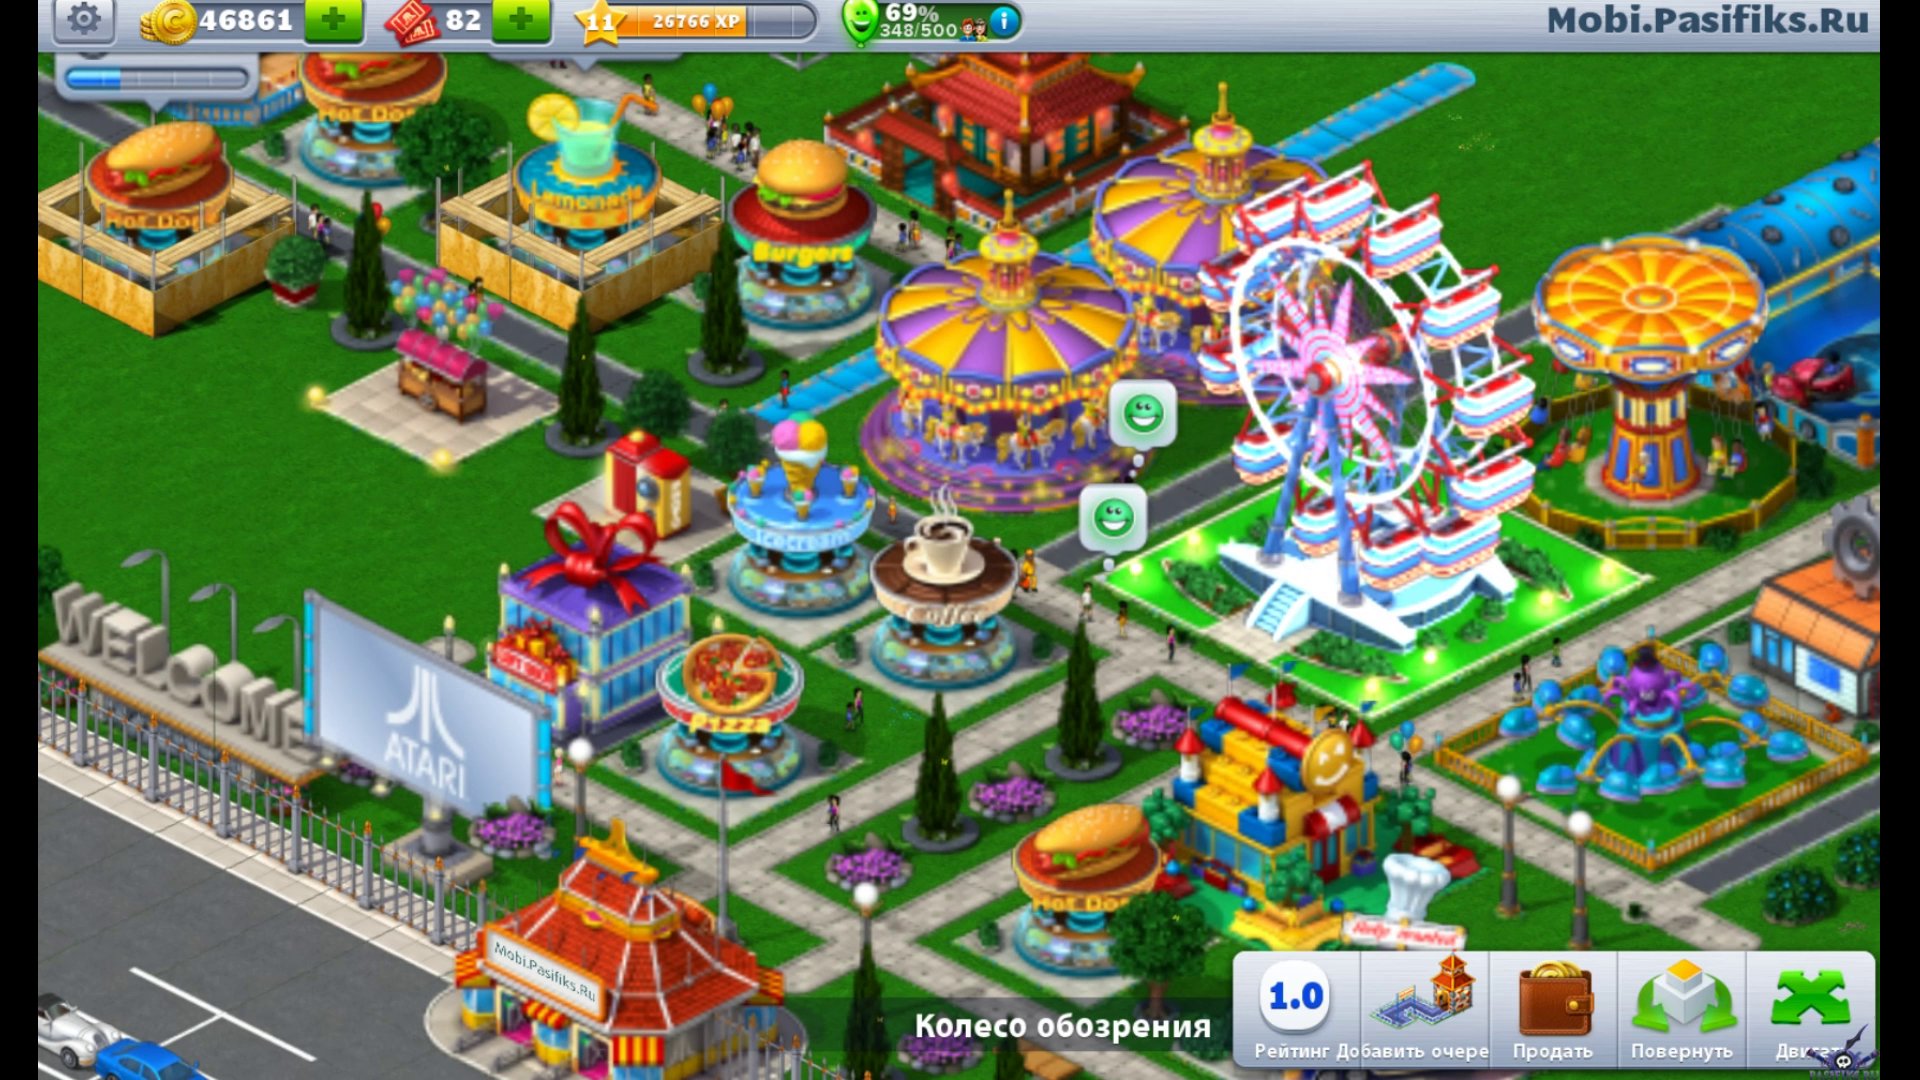 android-2-rollercoaster-tycoon-4